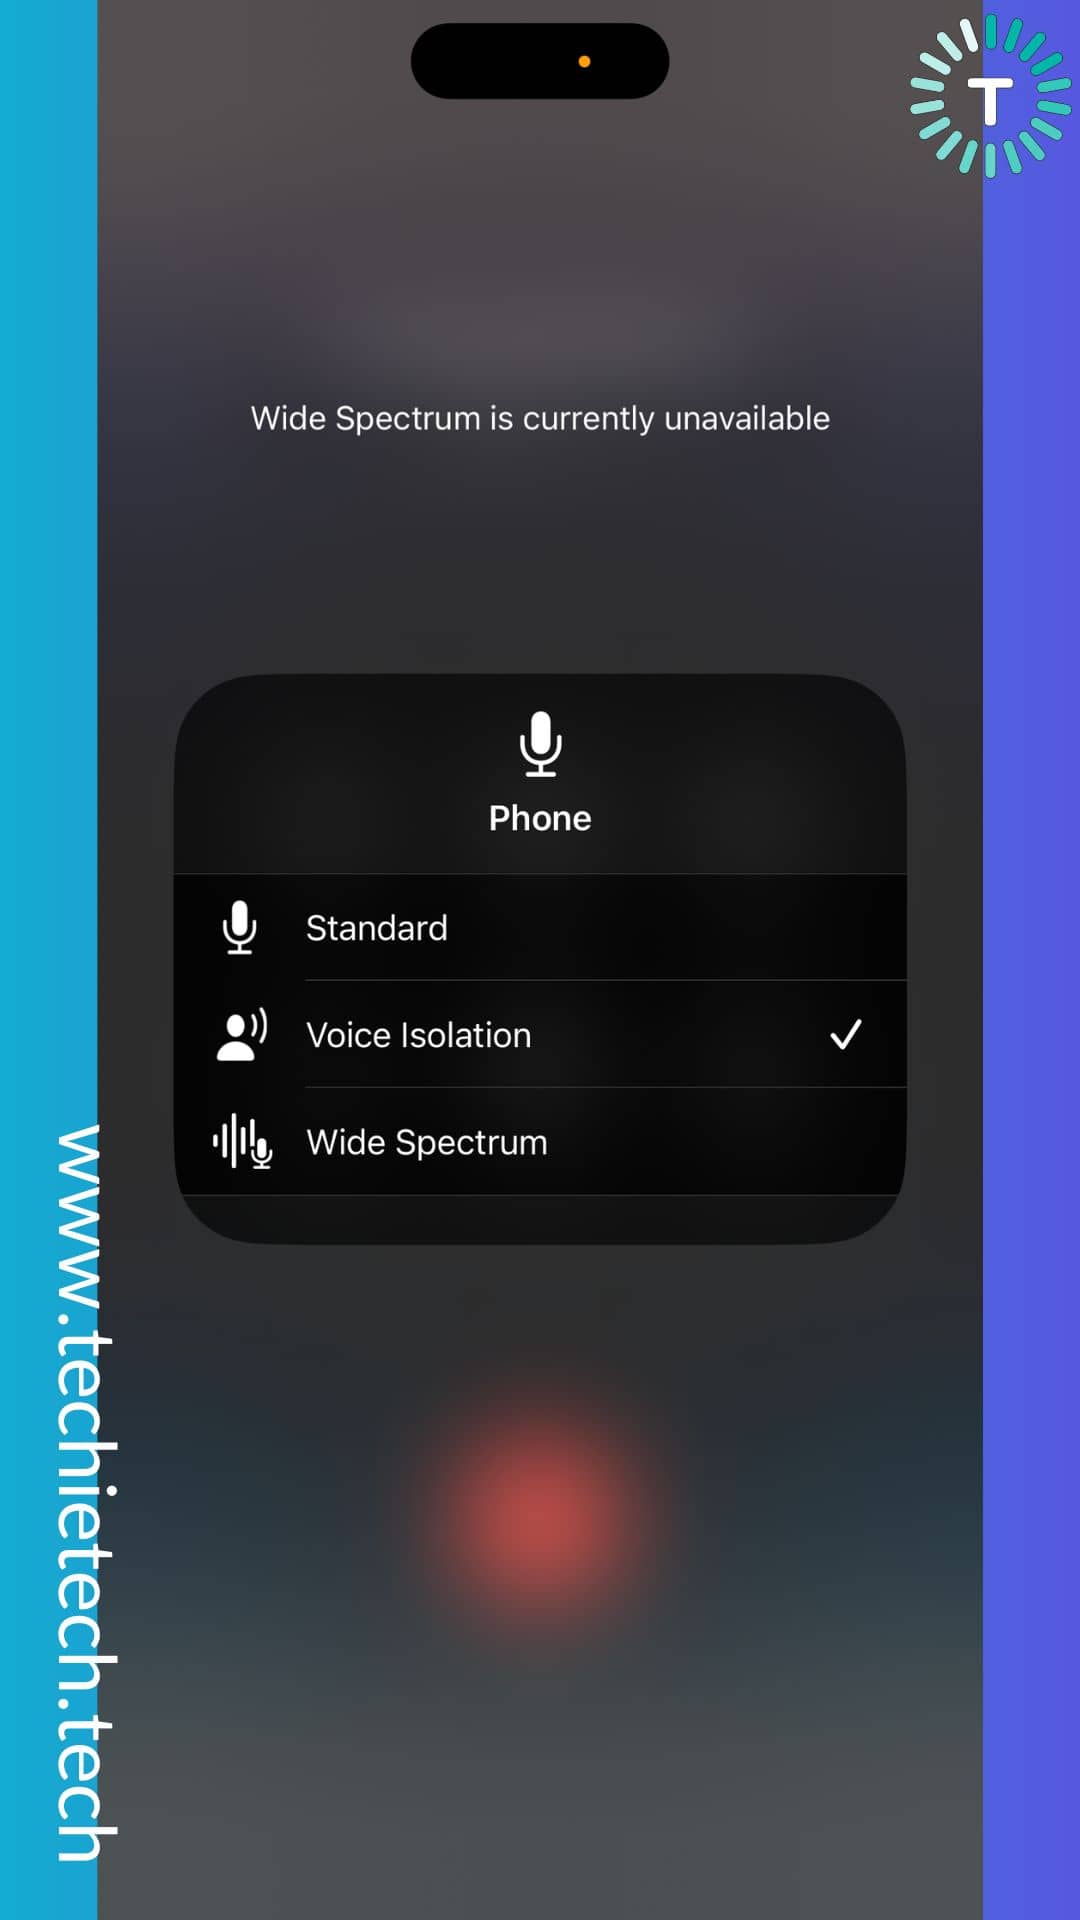 Changing Mic Mode to Voice Isolation on iOS 16.4.1